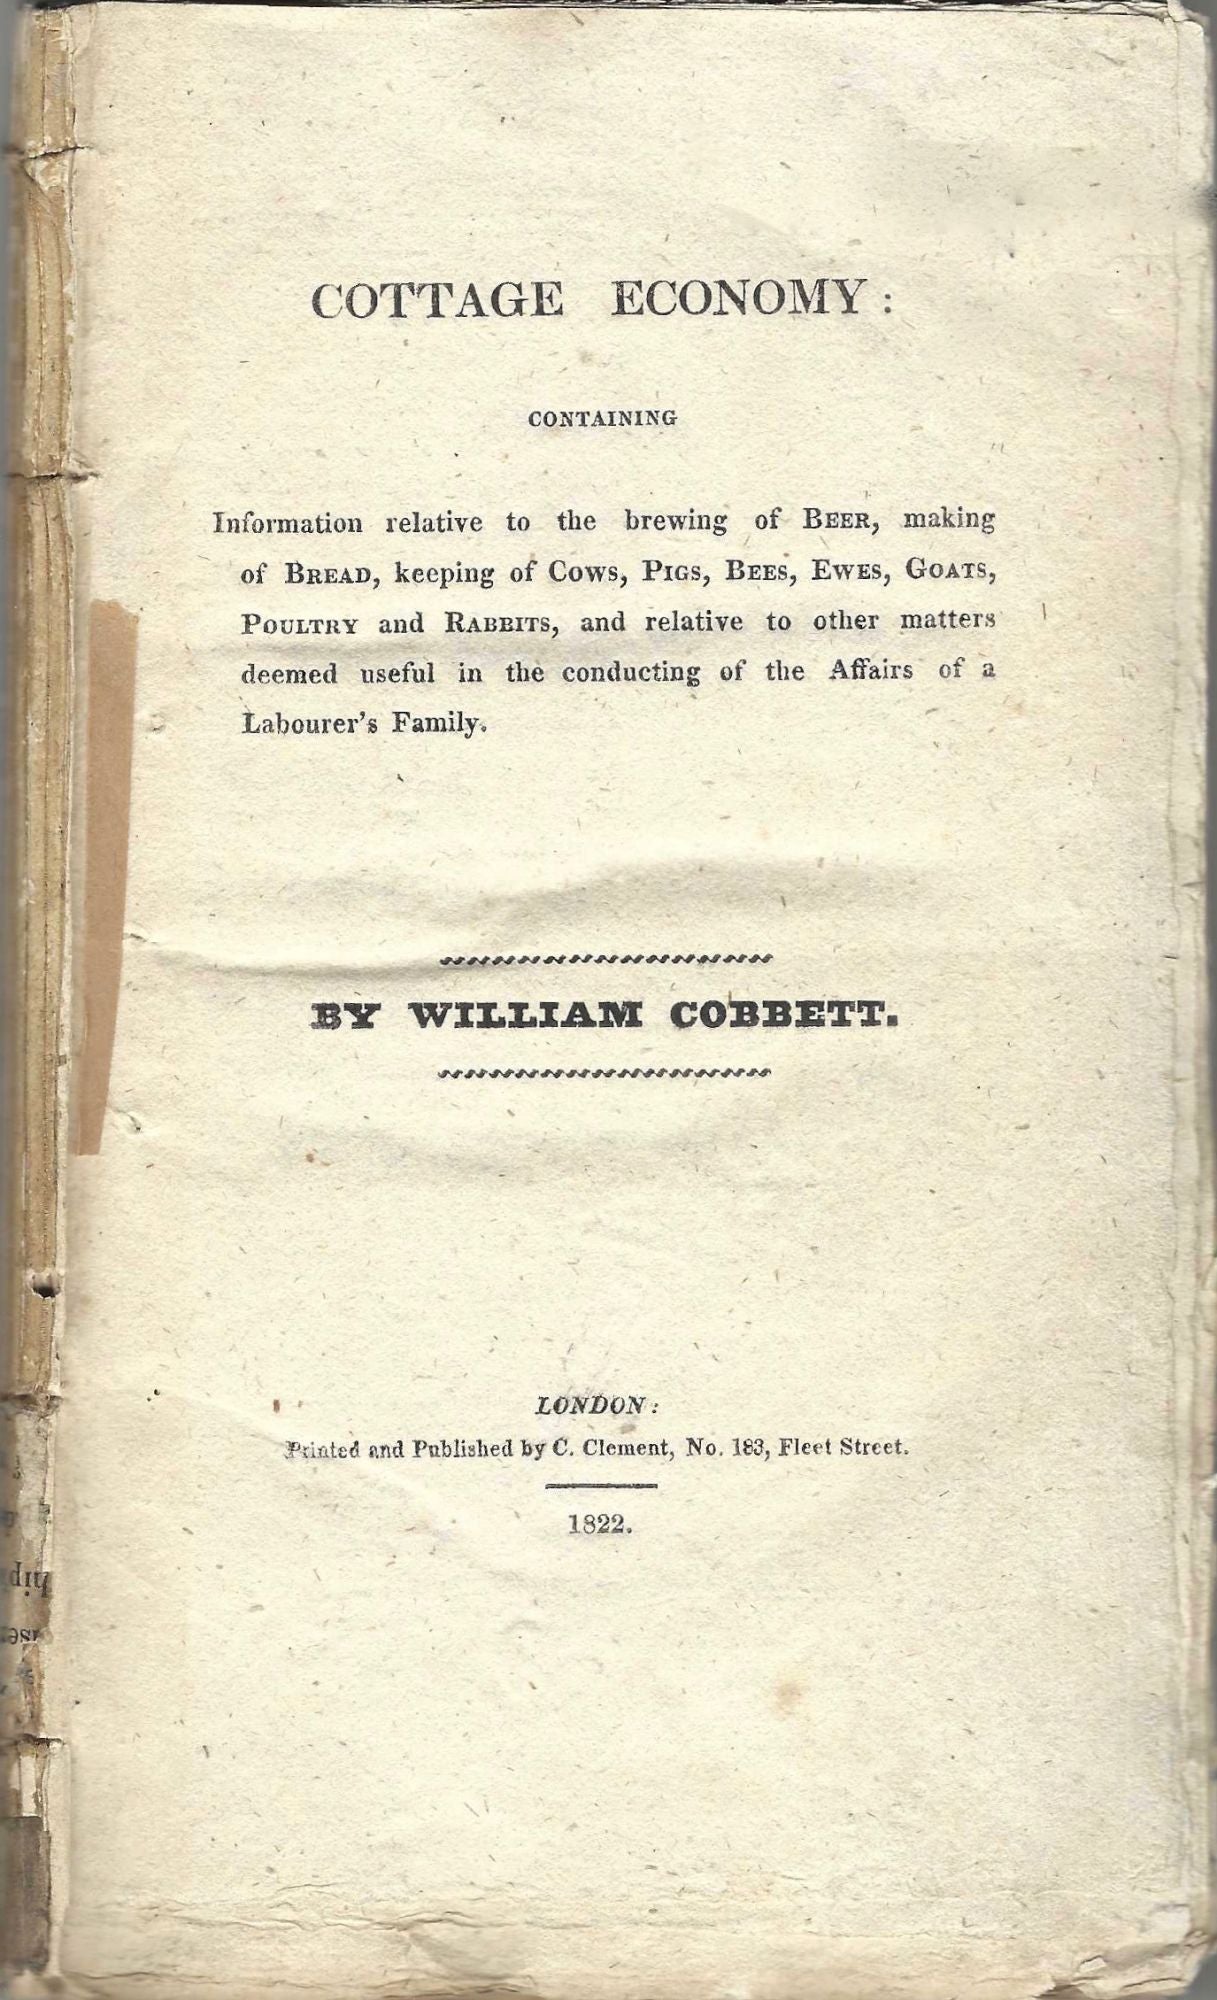 Item #7061 Cottage Economy: Containing information relative to the brewing of beer, making of bread, keeping of cows, pigs, bees, ewes, goats, poultry and rabbits, and relative to other matters deemed useful in the conducting of the affairs of a labourer's family. William Cobbett.